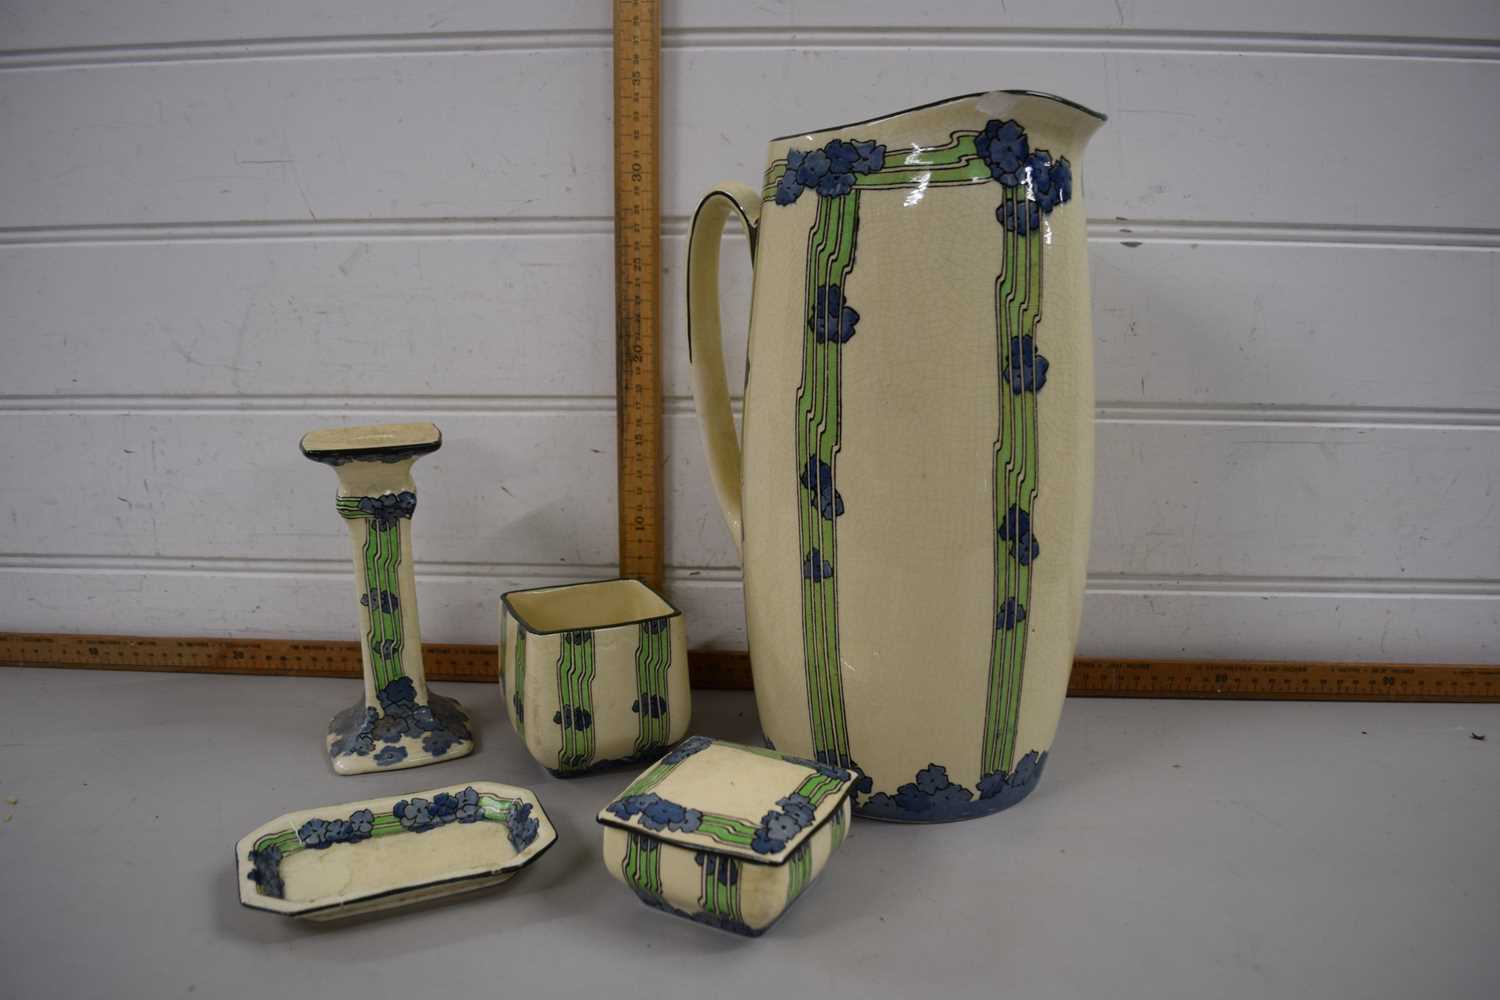 Royal Doulton dressing table set with jug, candlestick, small box and cover, all decorated in Art